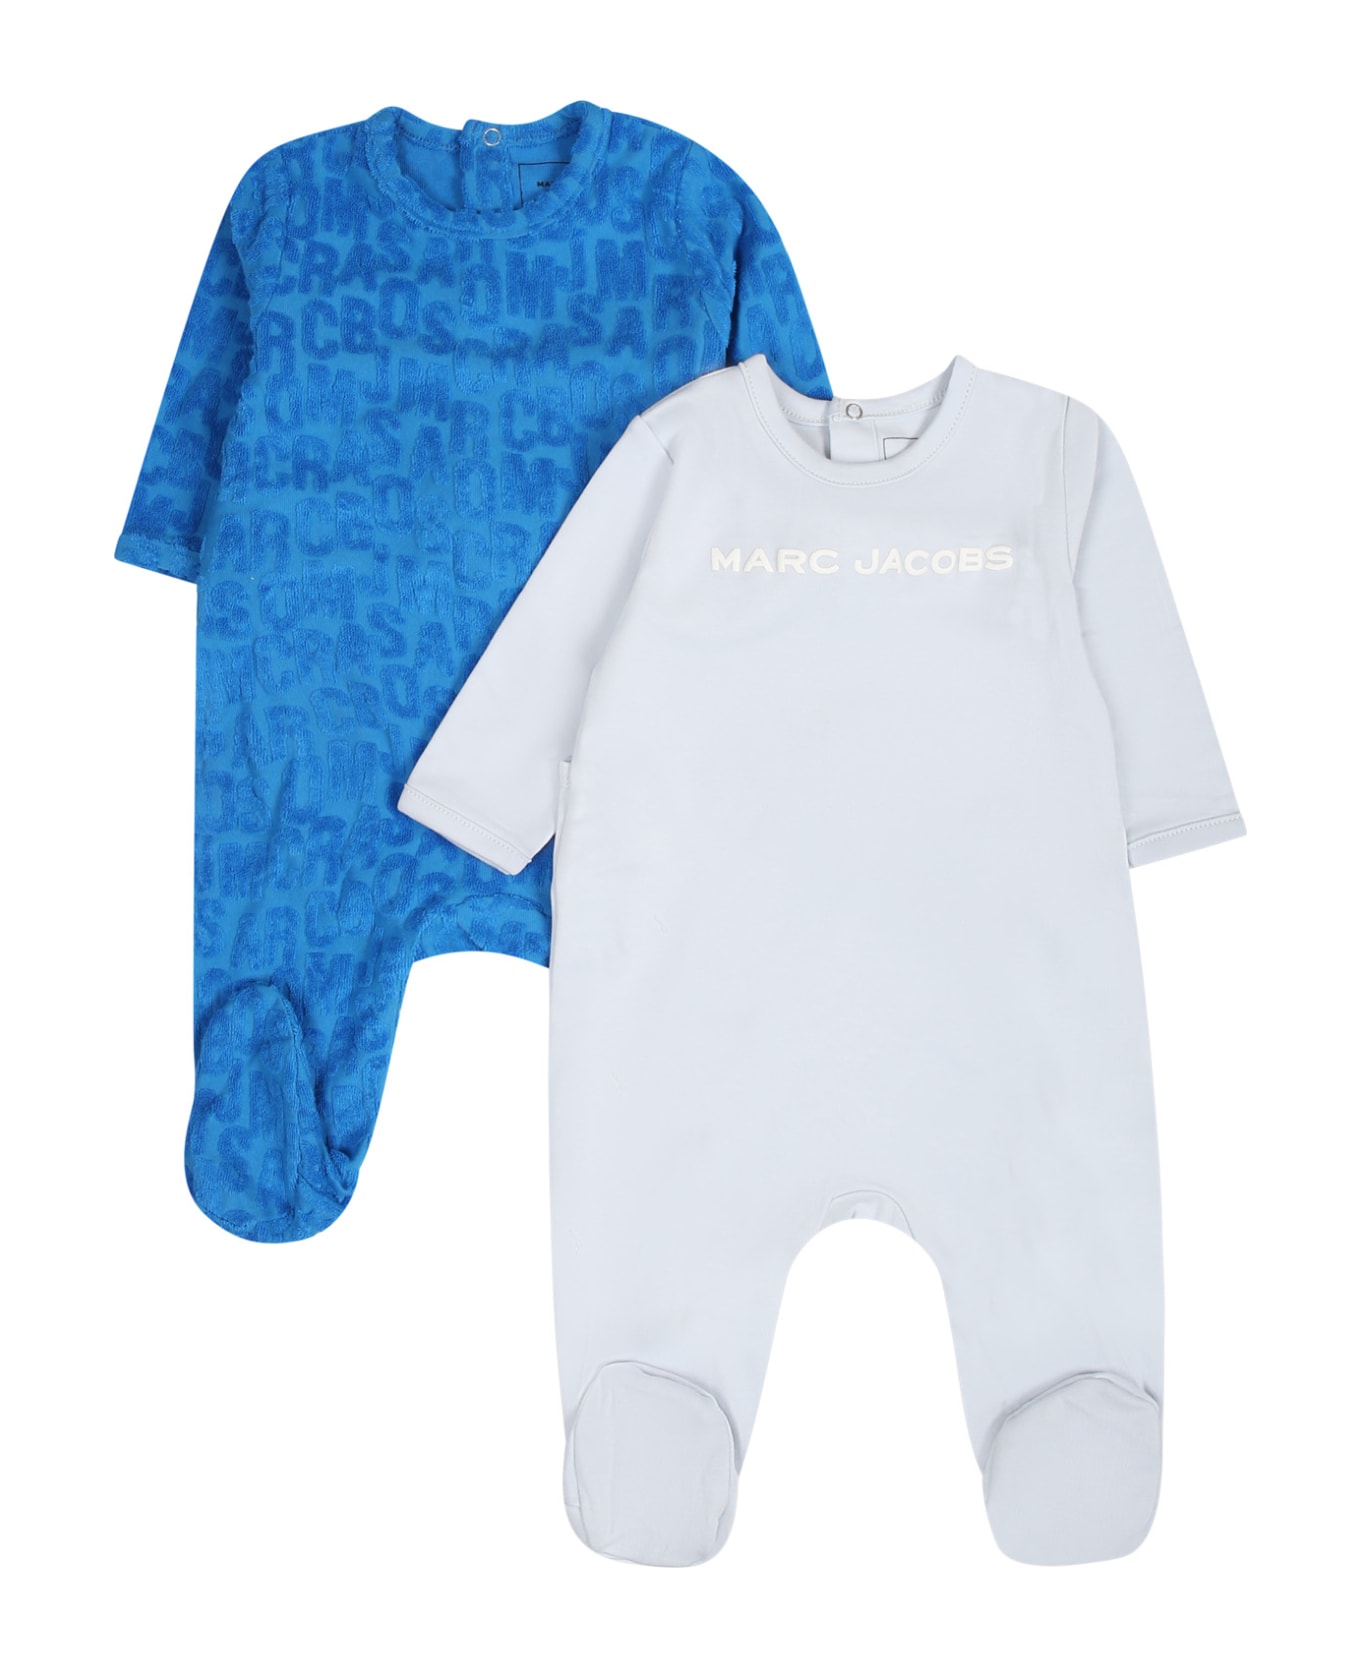 Marc Jacobs Multicolor Set For Baby Boy With Logo - Light Blue